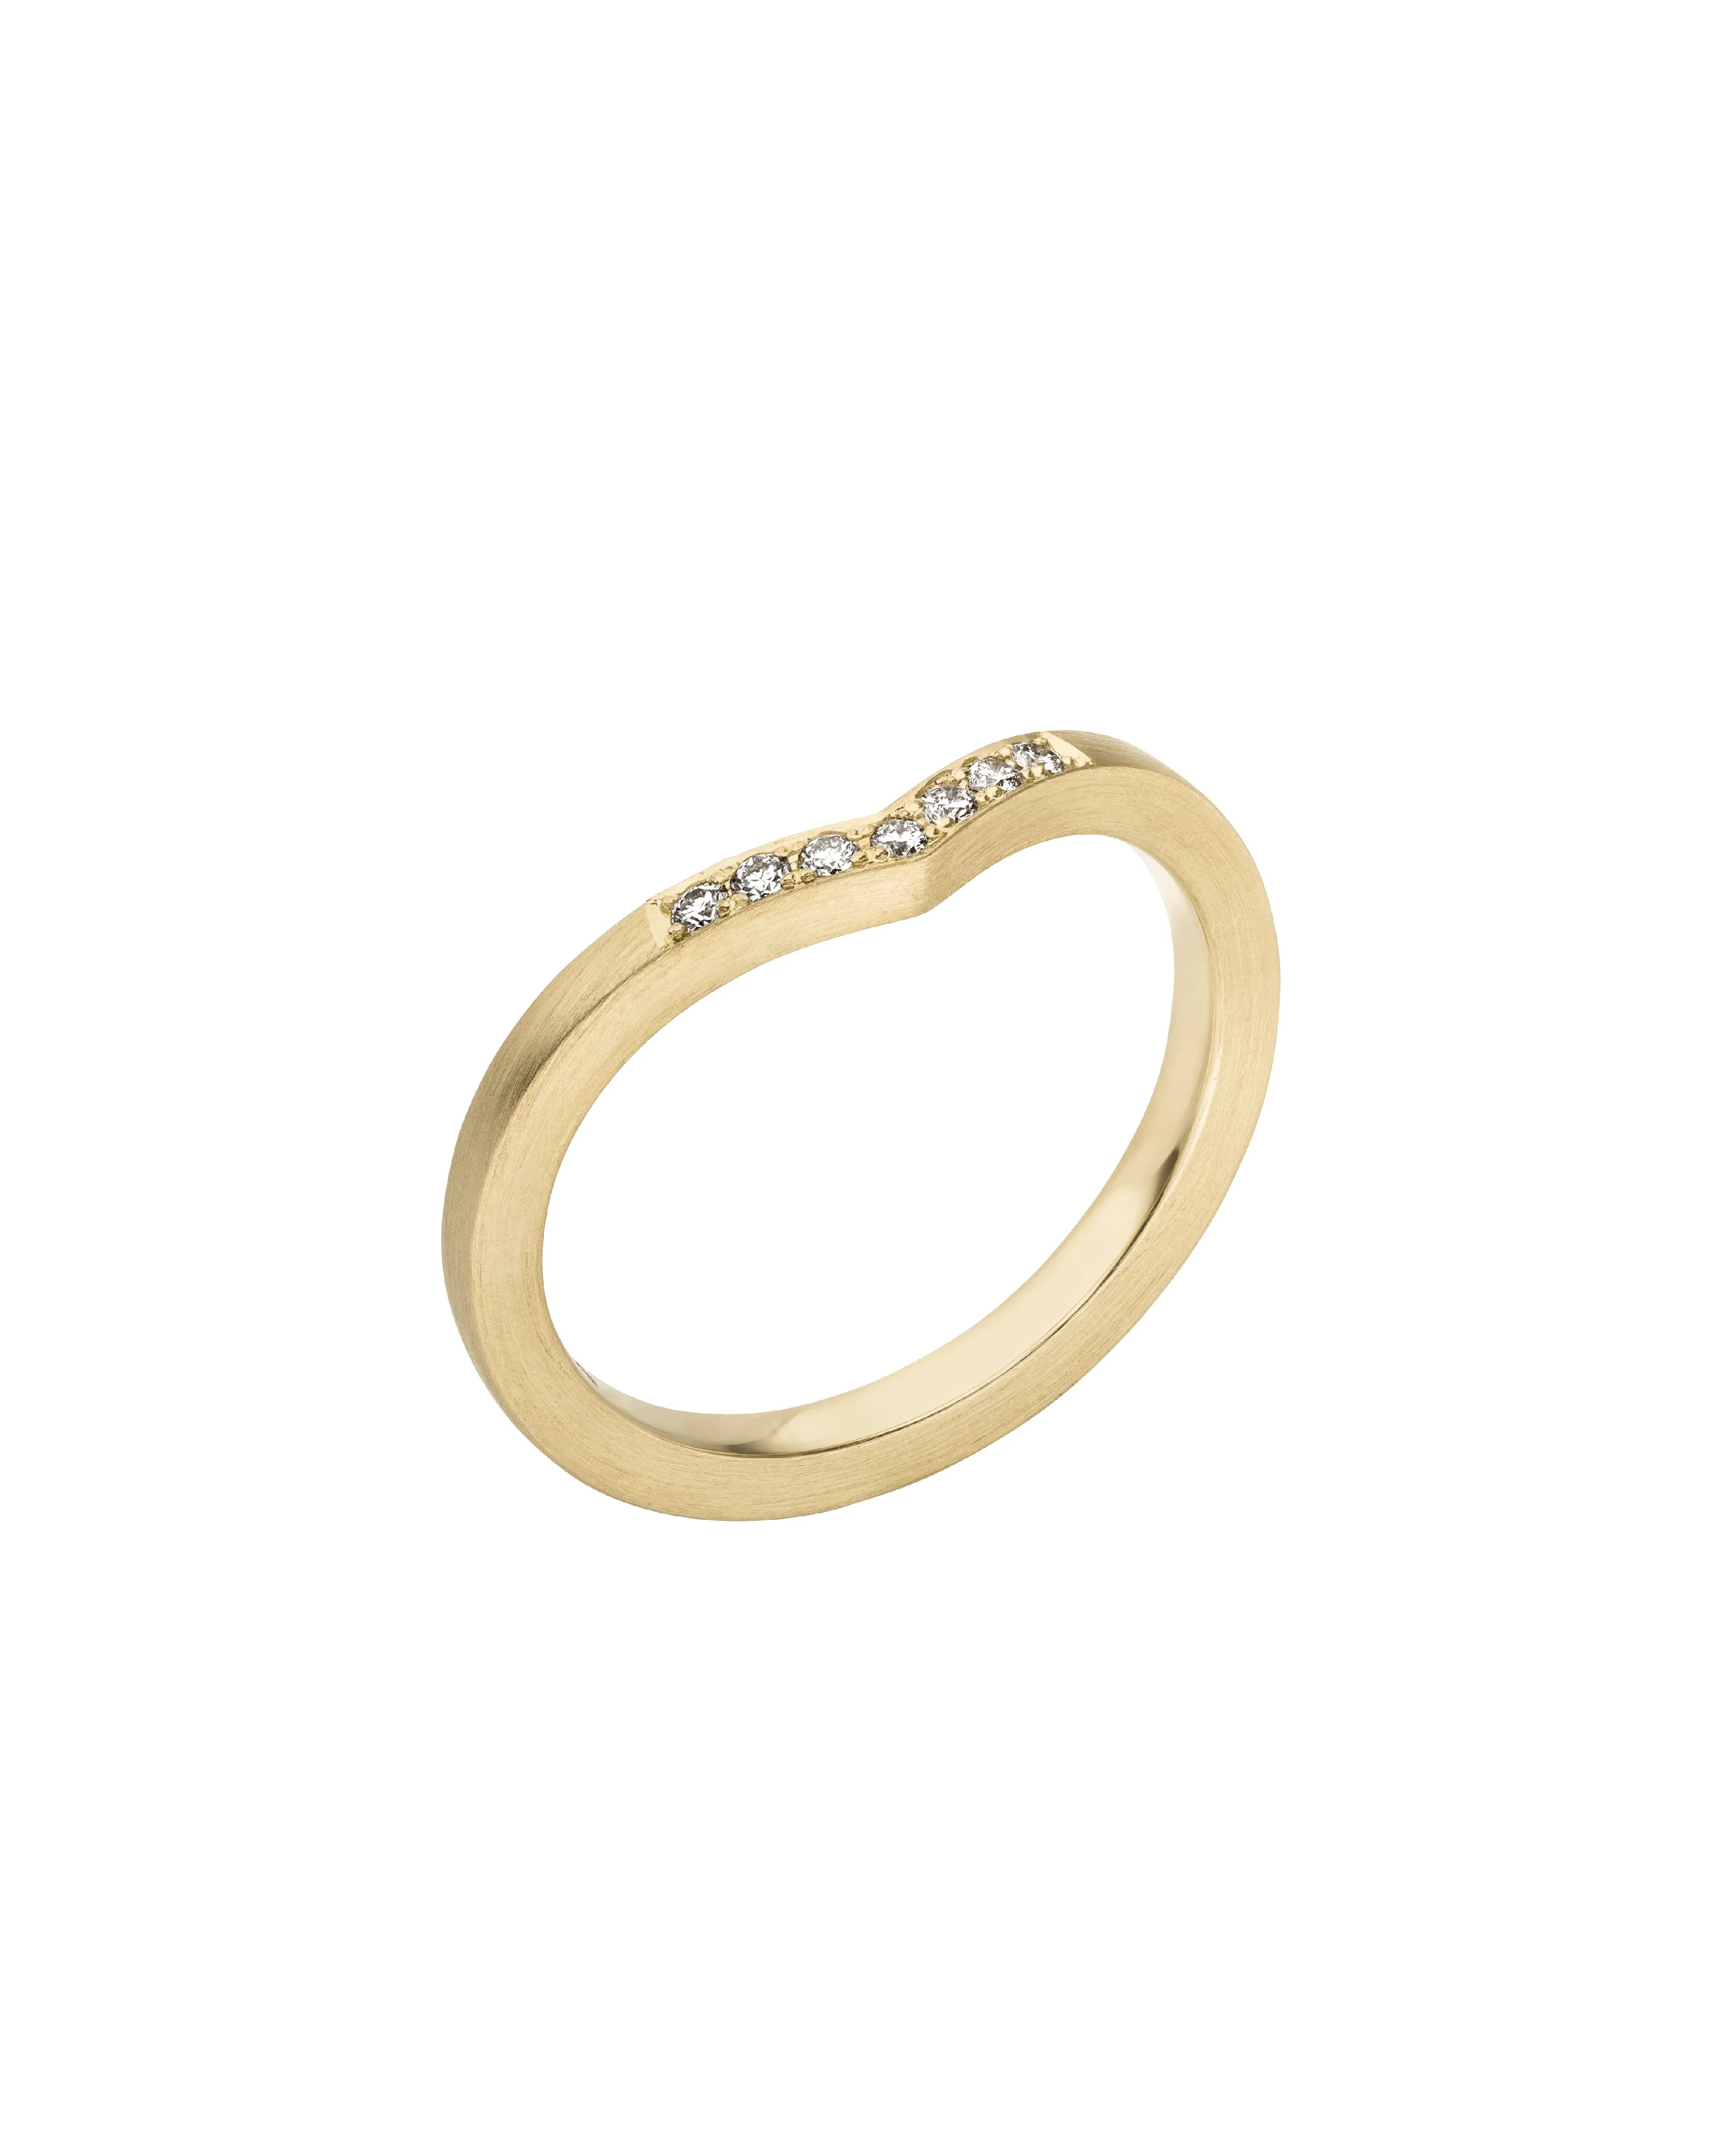 TRIANGLE Ring Gelbgold 750